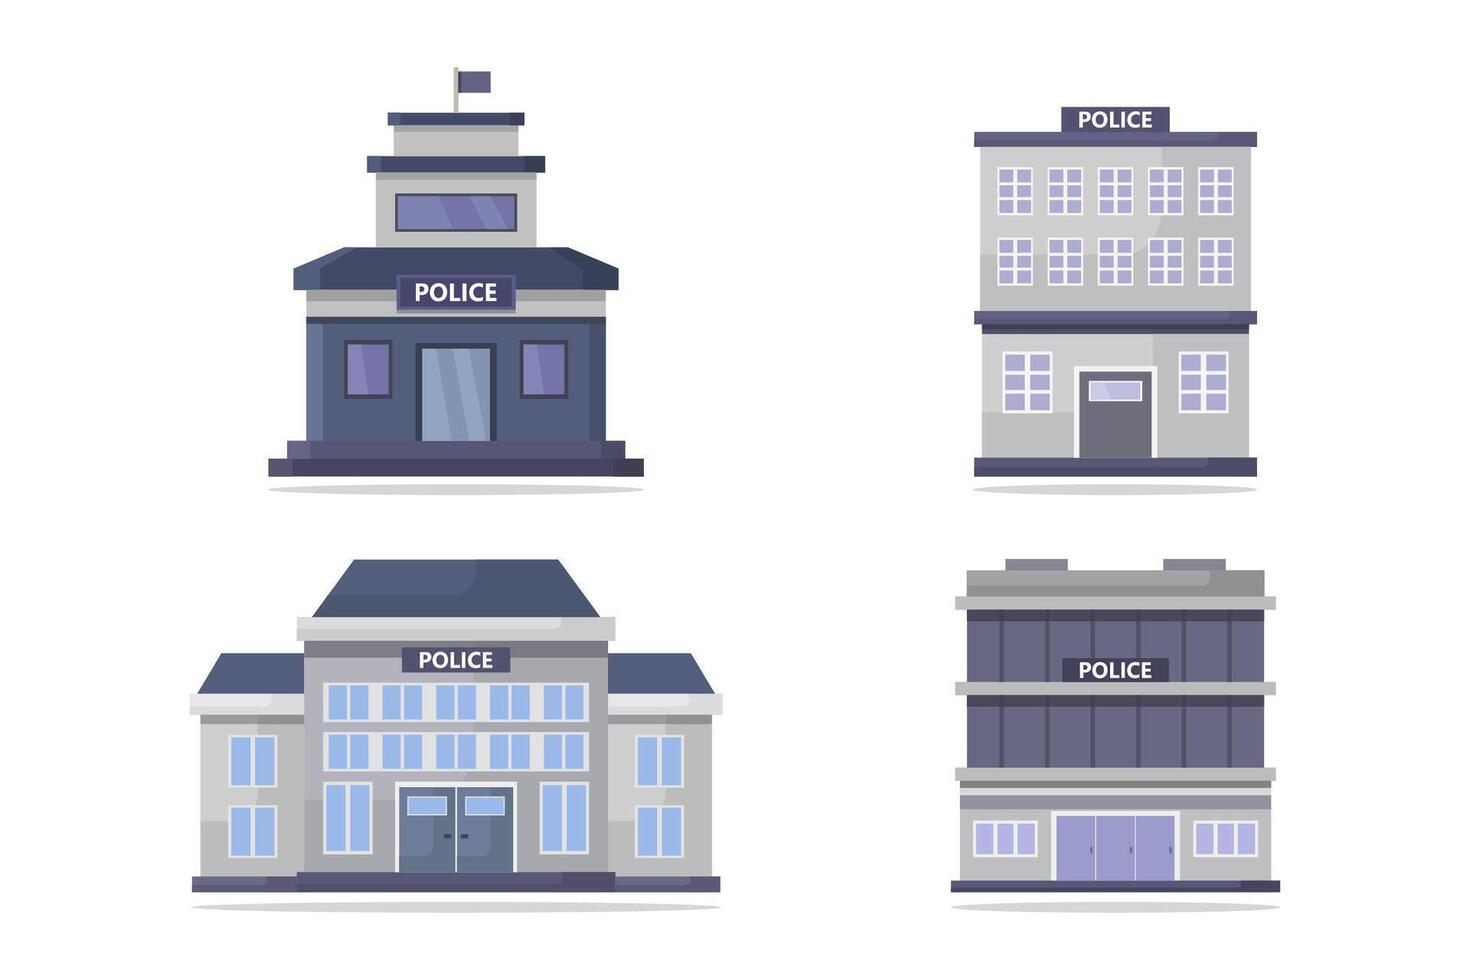 Police station illustrated on white background vector